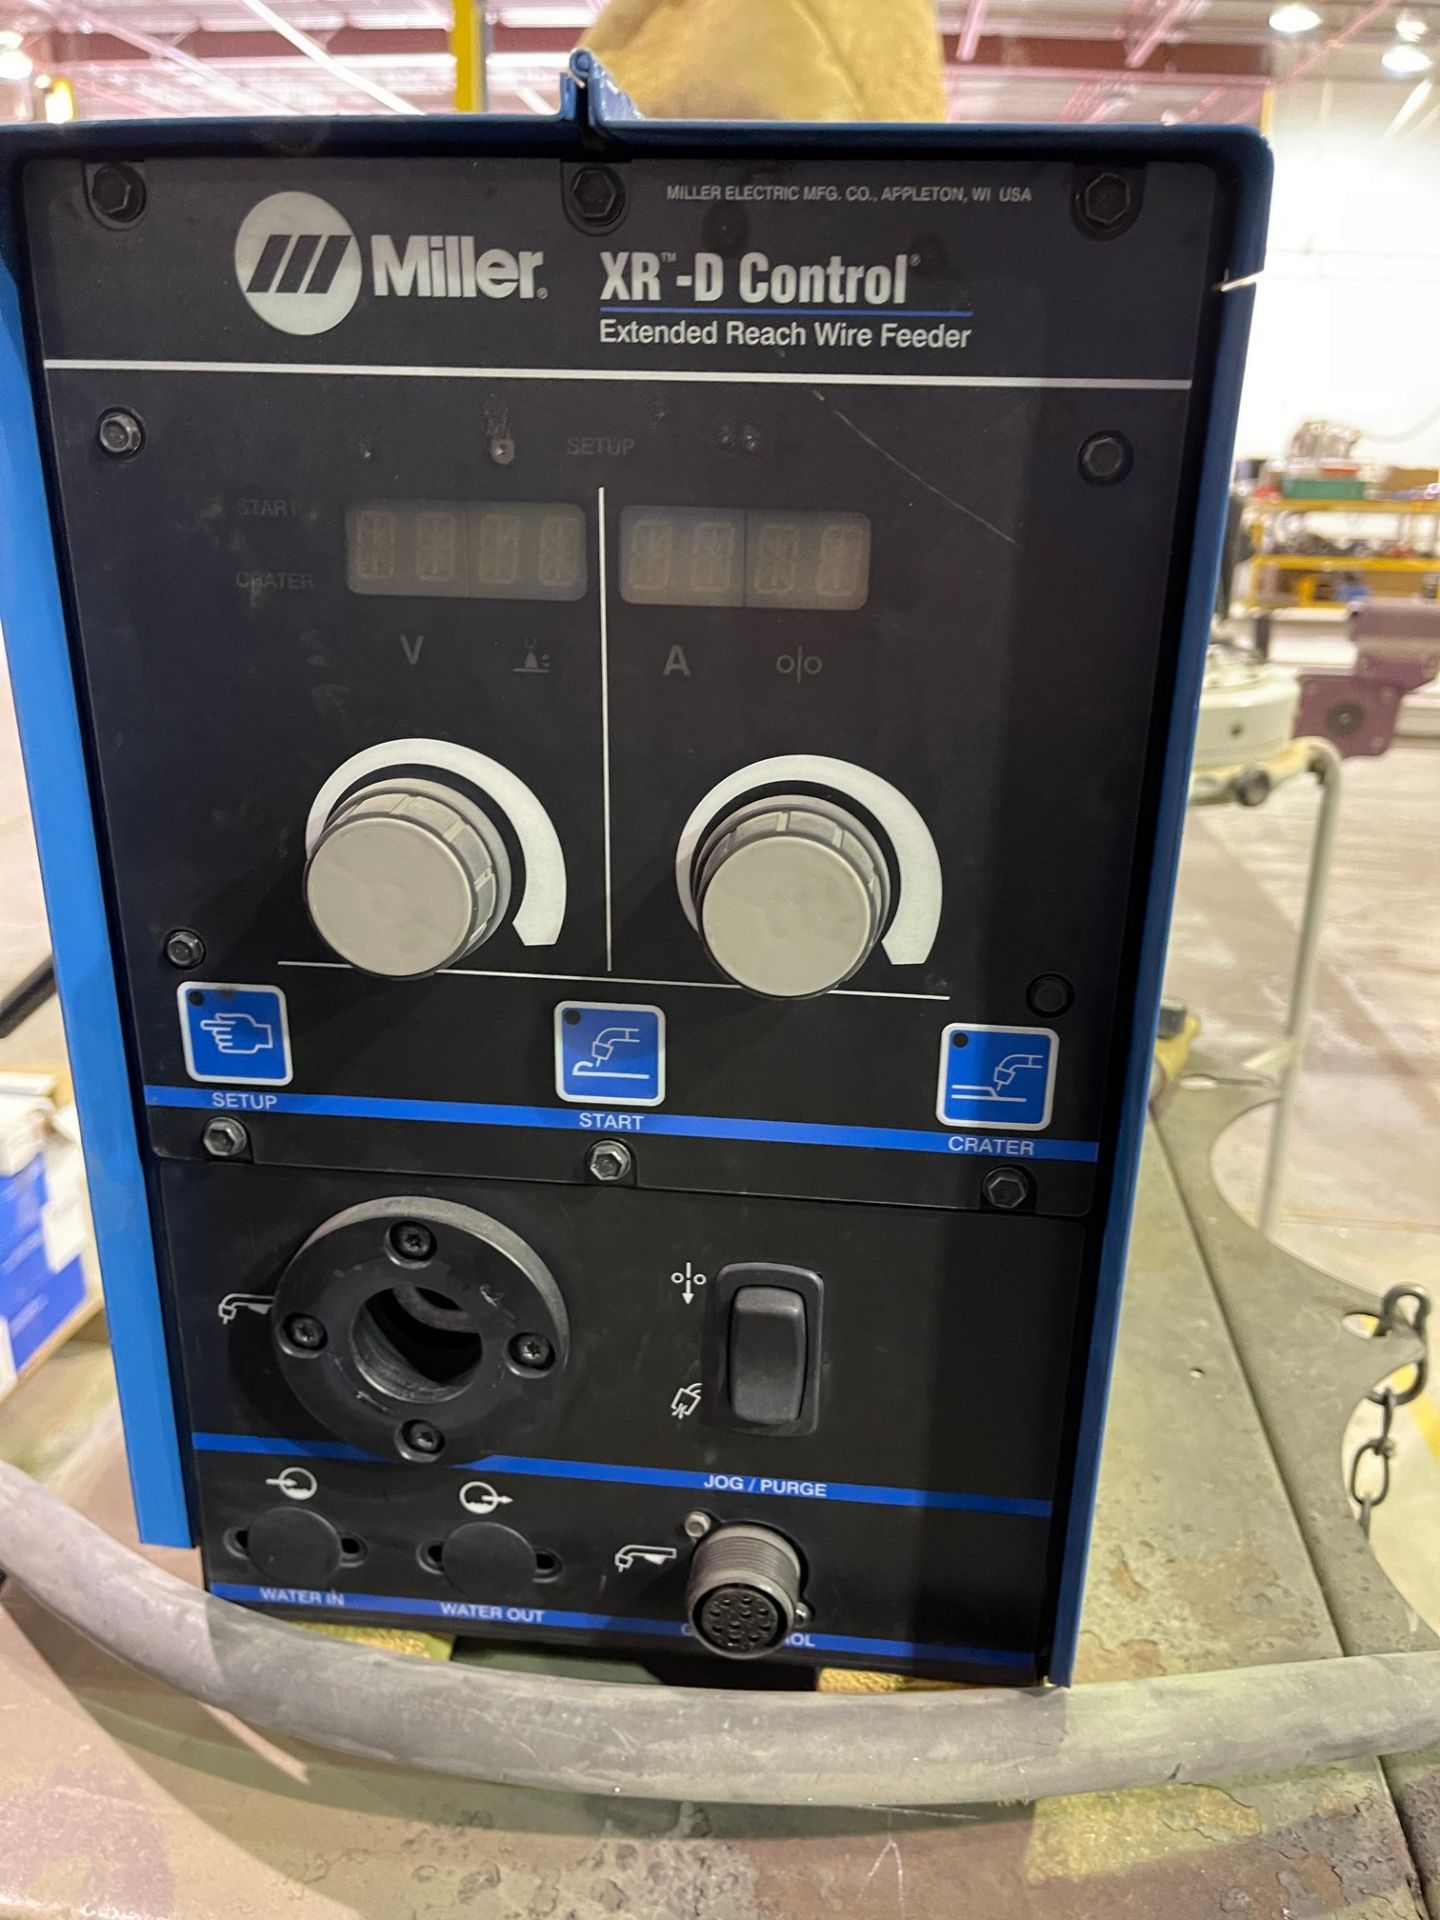 MILLER XMT 350 CC/CV WELDER W/ MILLER XR-D WIRE FEED CONTROL, S/N: LG010641A (RIGGING FEE $25) - Image 5 of 7